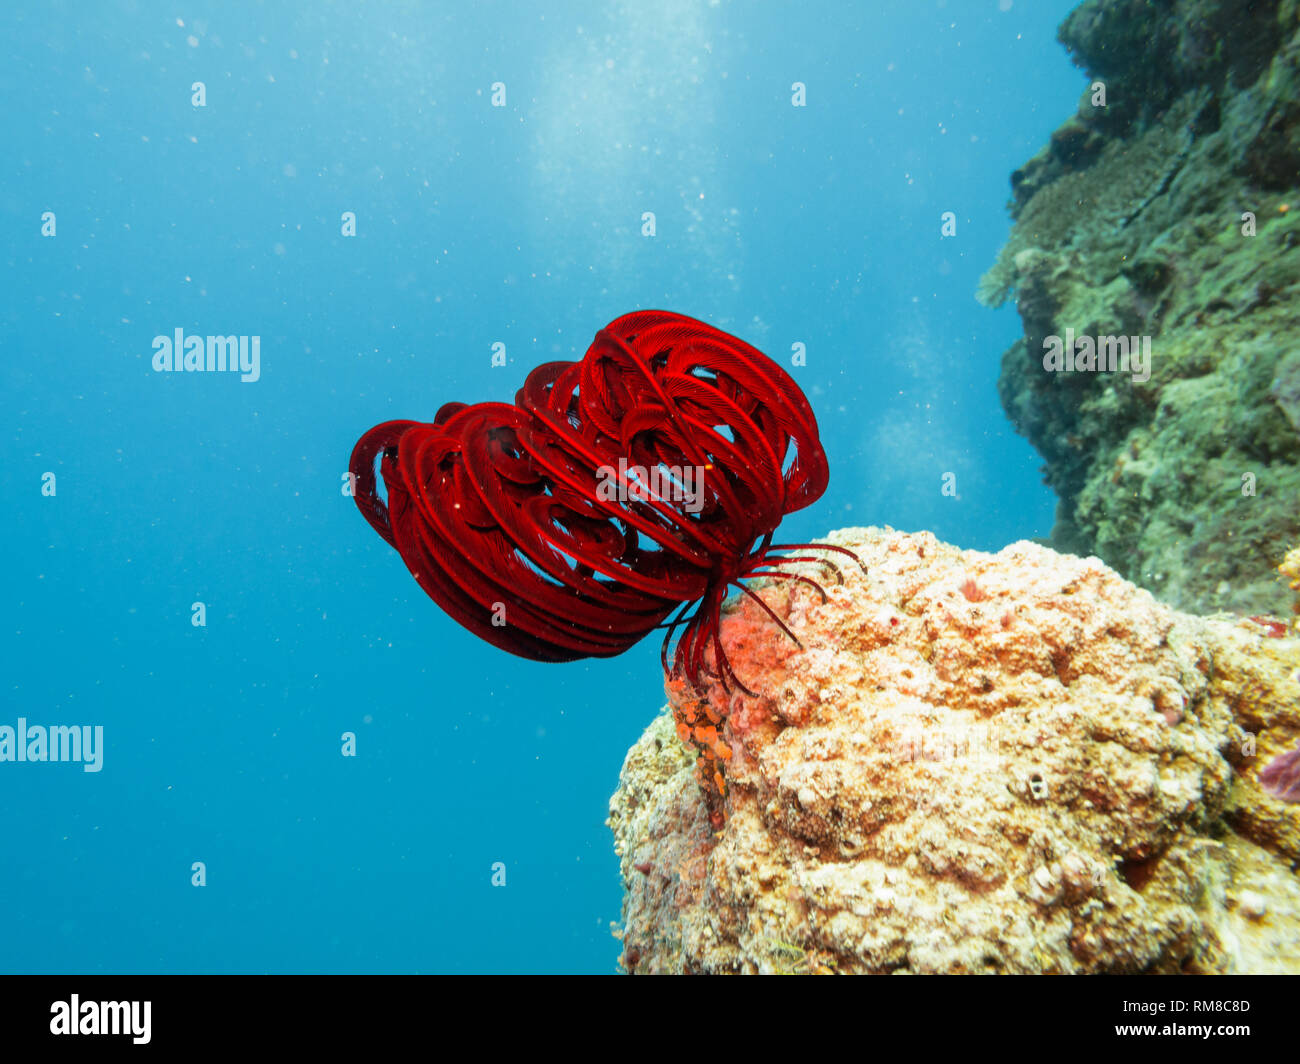 Closeup of red feather sea star on Great Barrier Reef Australia Stock Photo